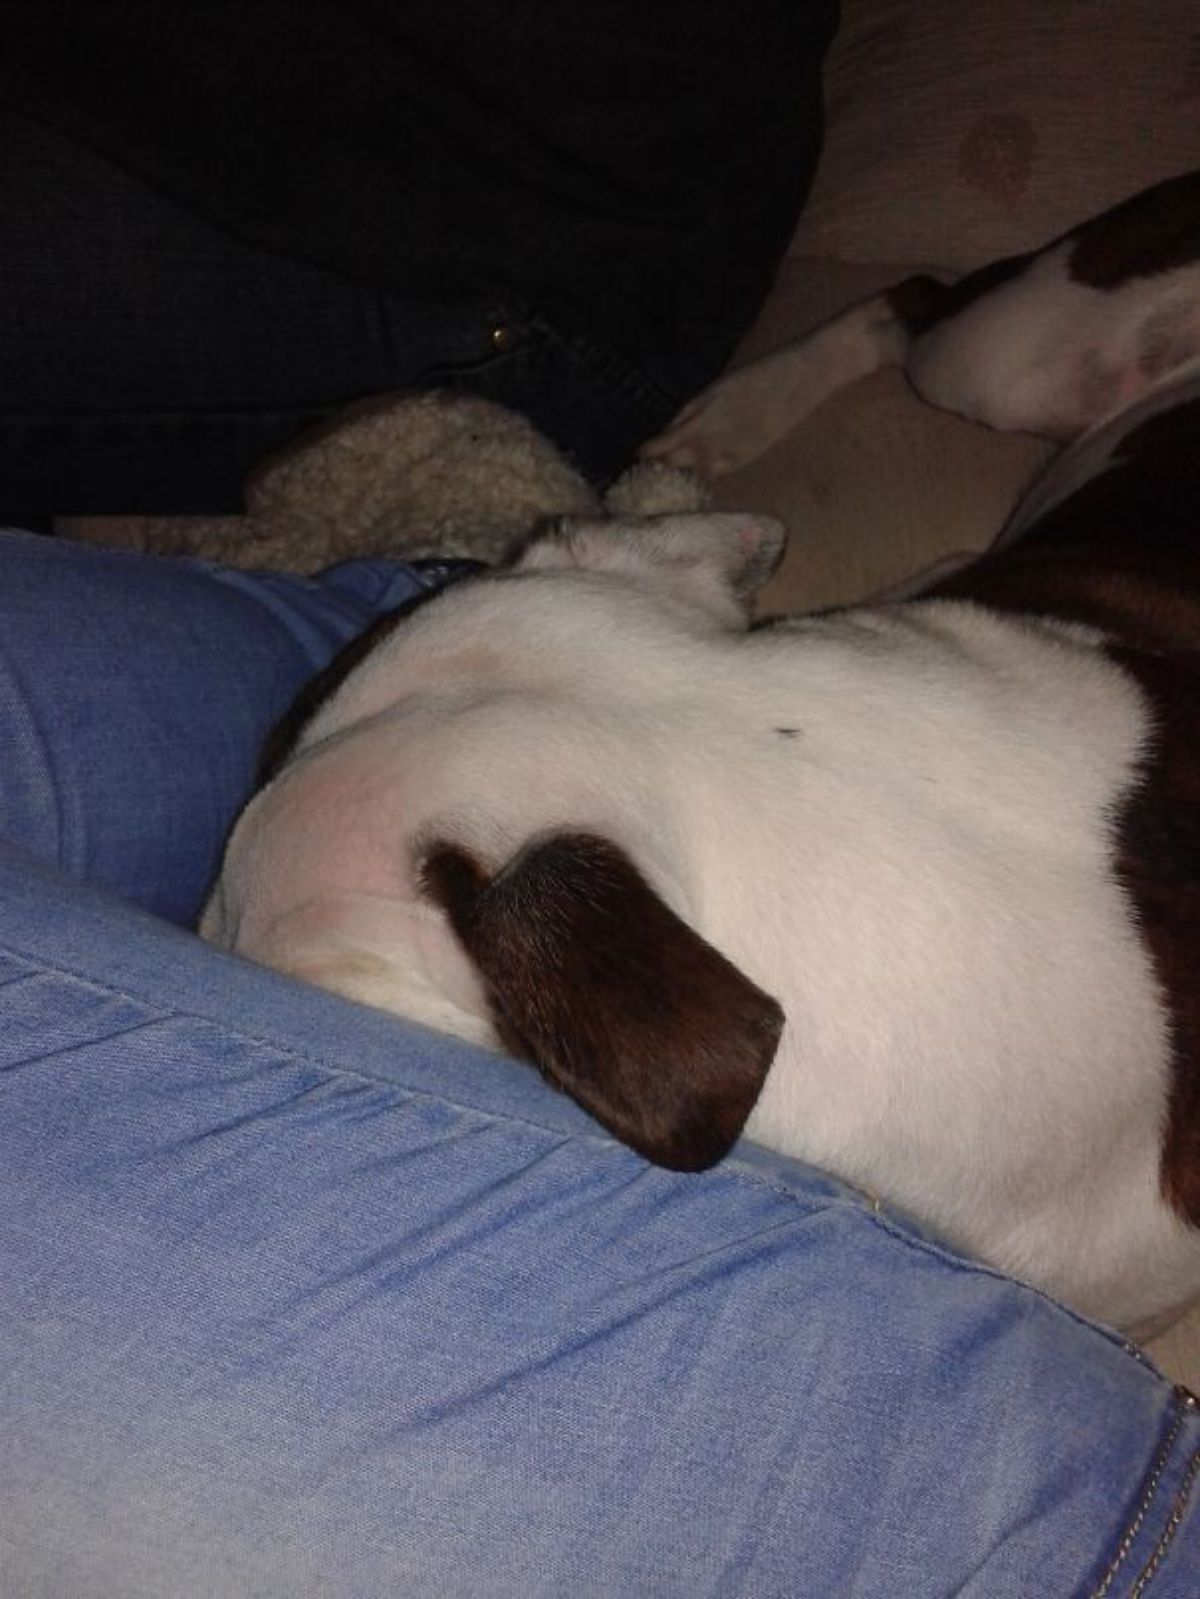 white and black dog sleeping with the face hidden under someone's knee